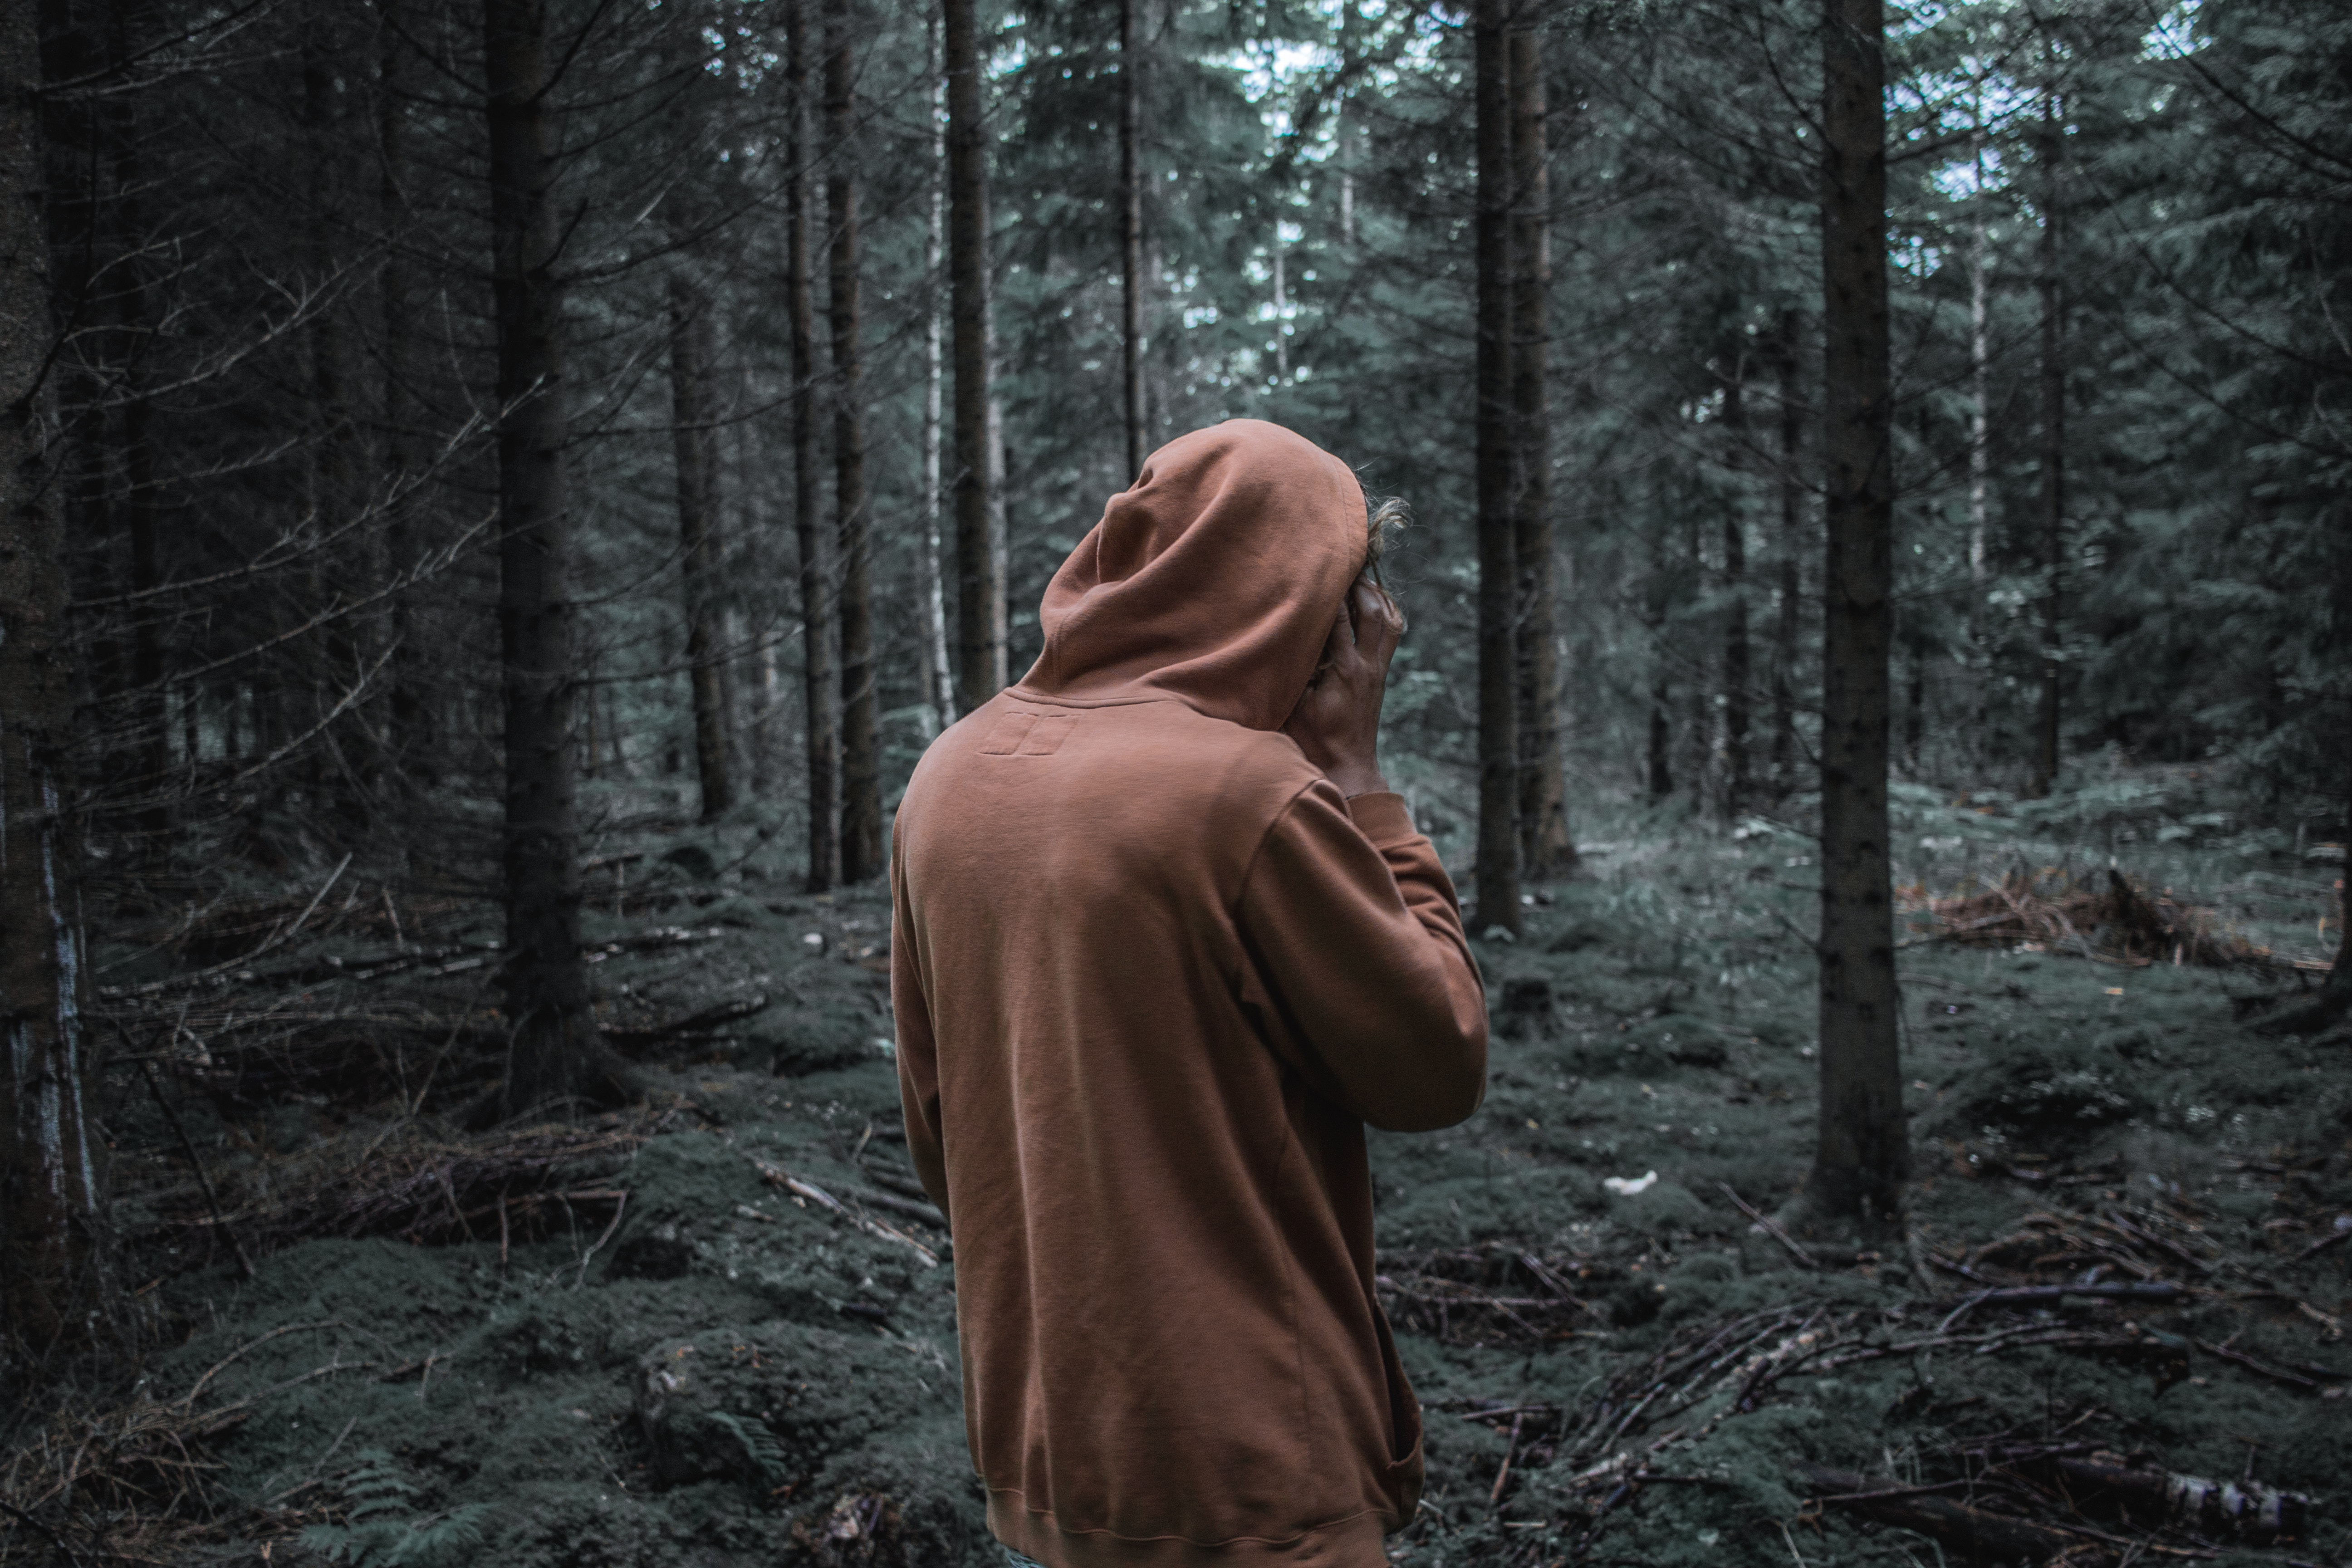 75280 Screensavers and Wallpapers Person for phone. Download miscellanea, miscellaneous, forest, stroll, human, person, hoody, sweatshirt pictures for free